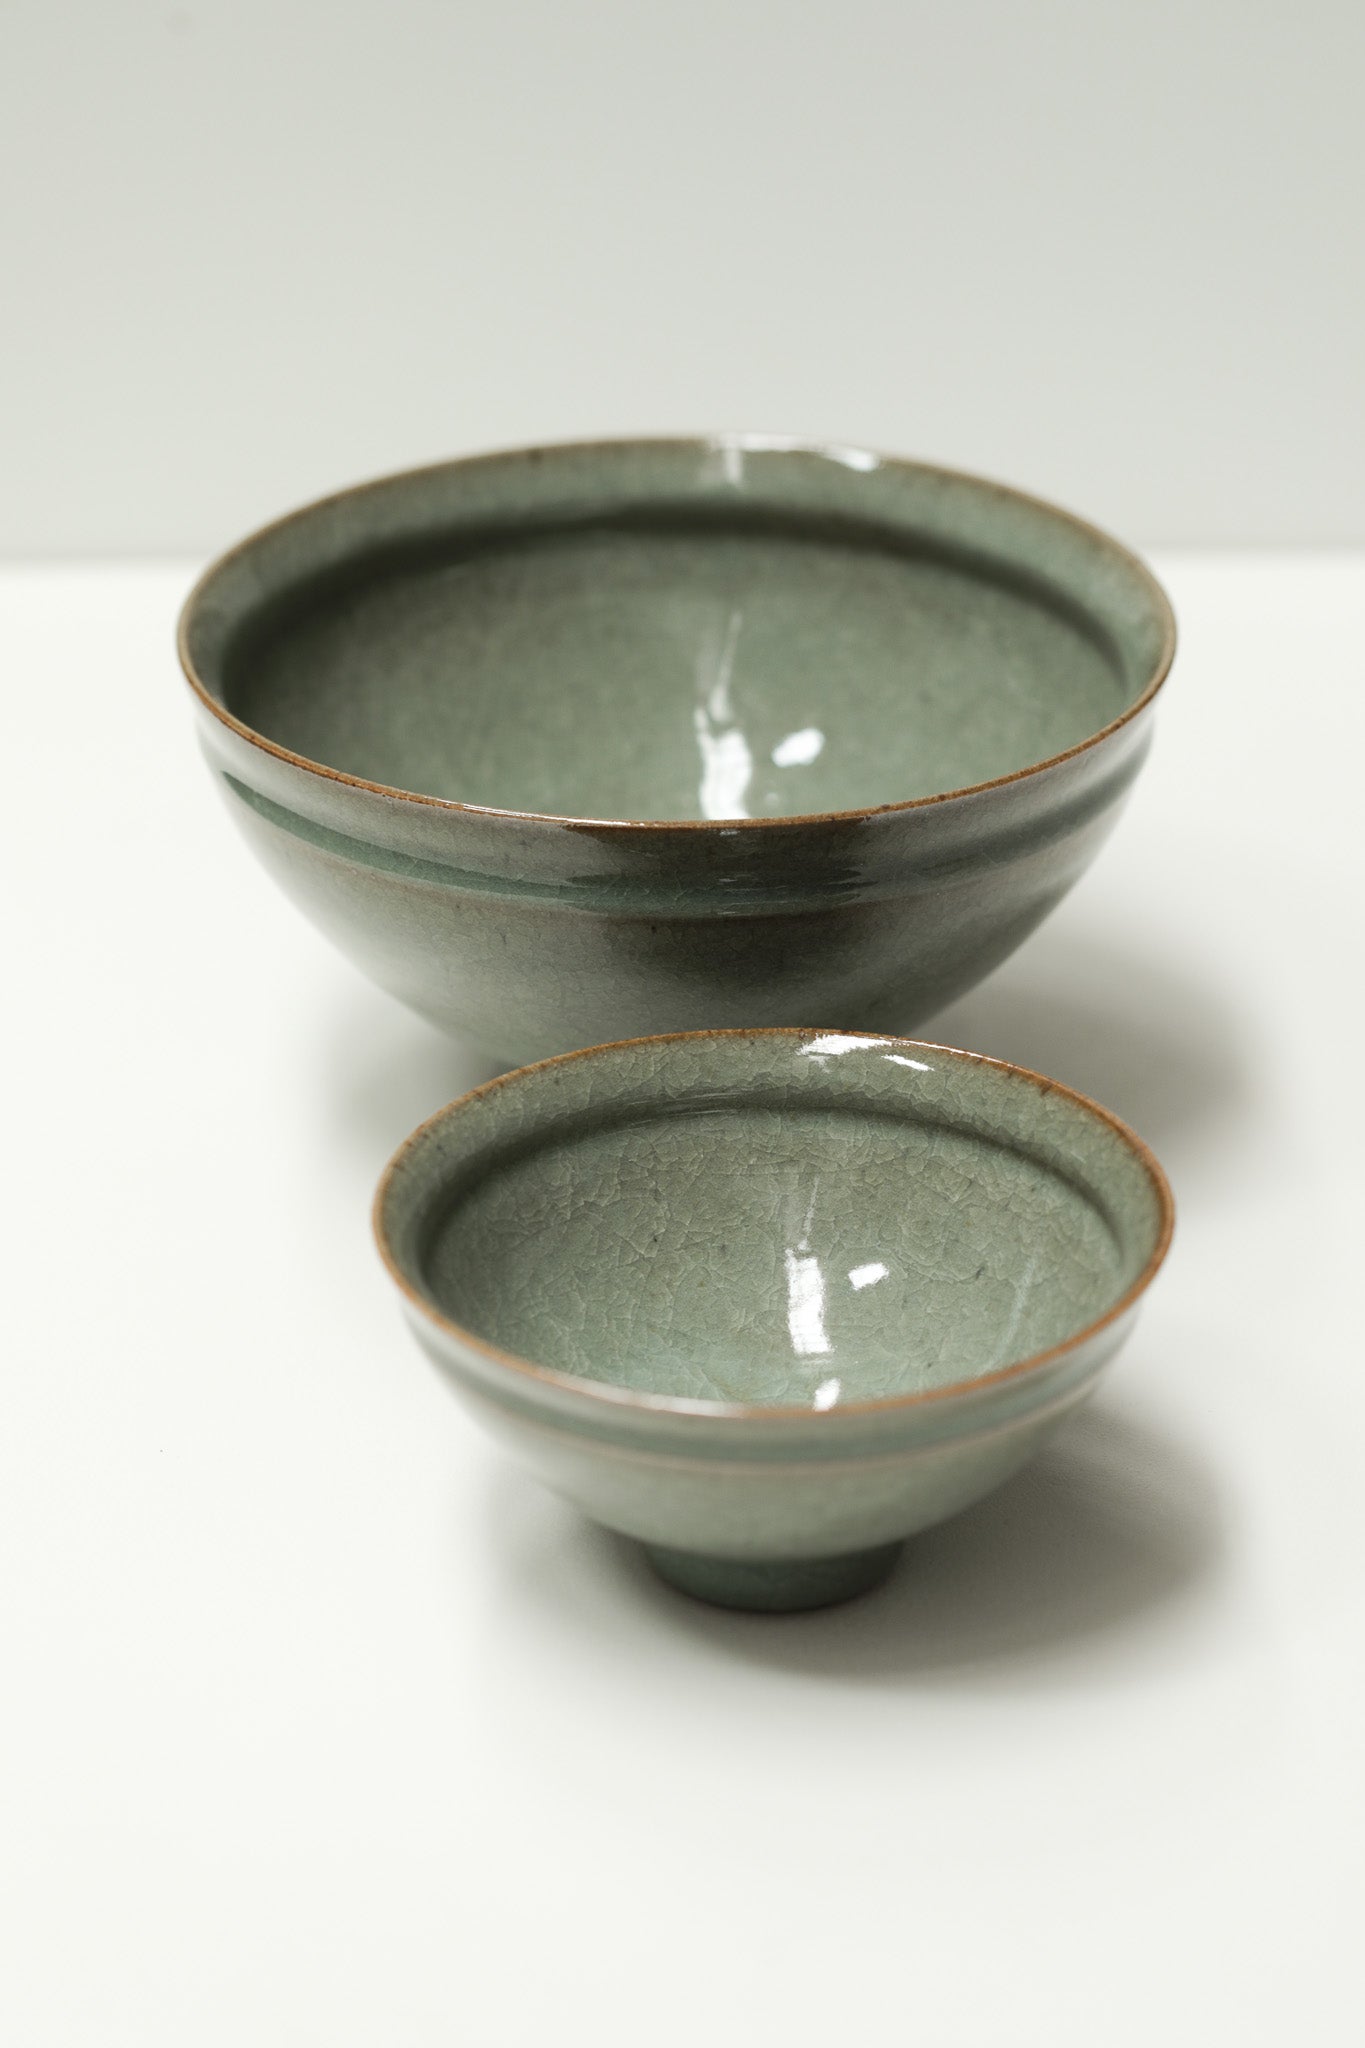 Florian Gadsby: Pair of Indented Bowls